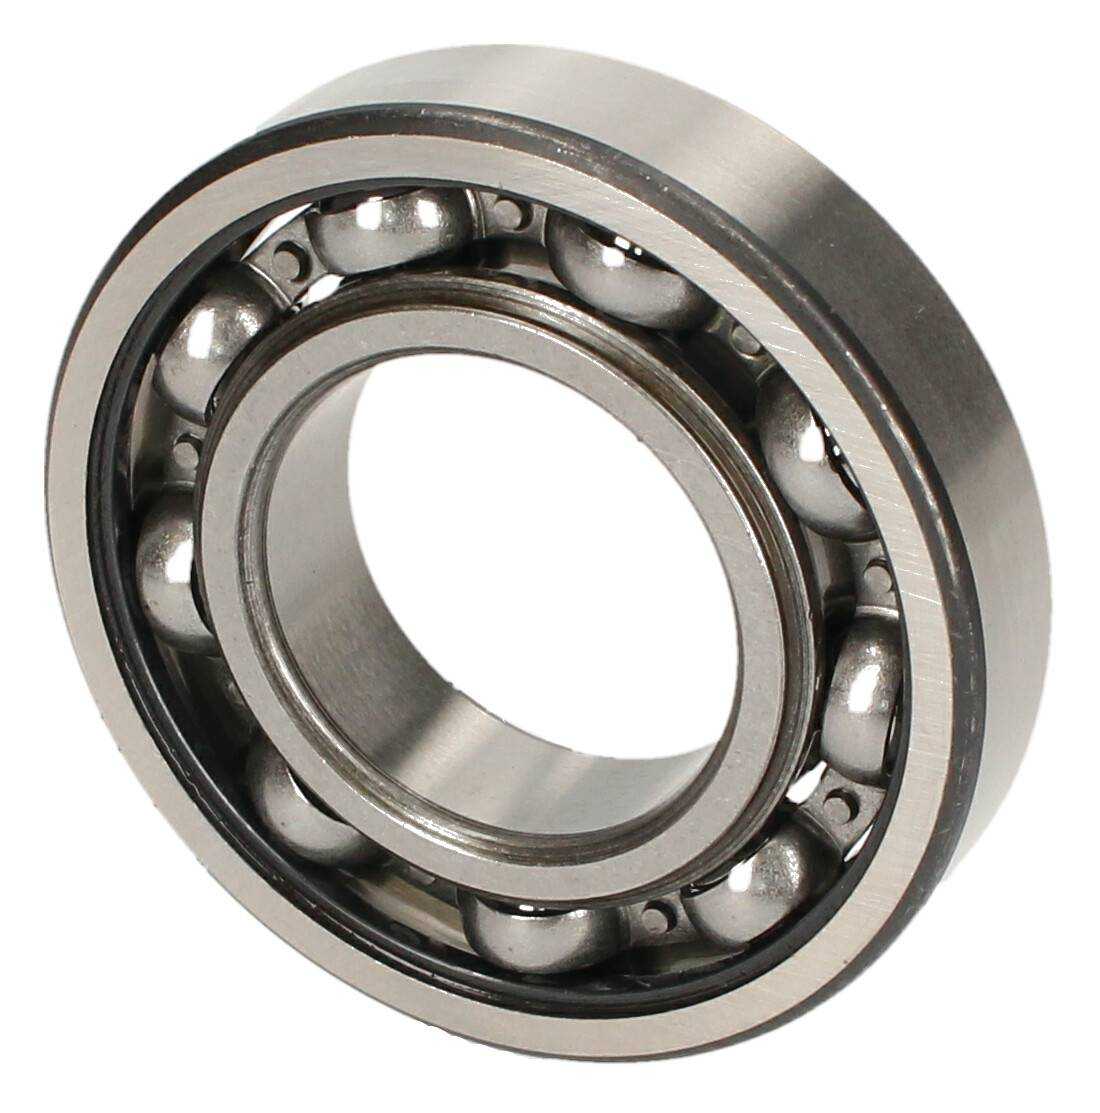 BALL BEARING 6302 SKF (WITHOUT PACKAGING) - Image 1